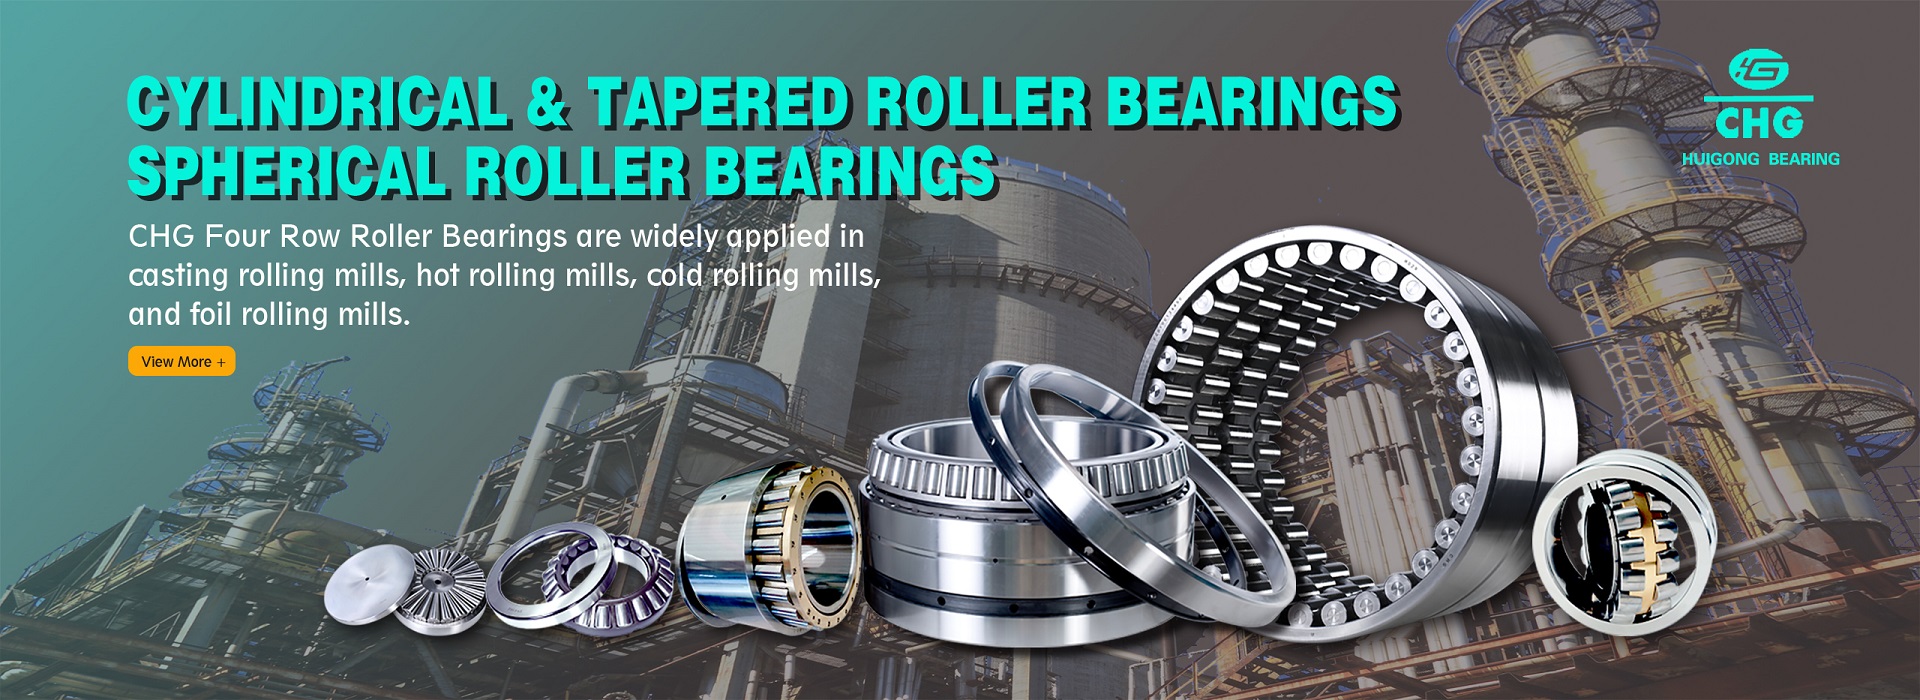 Cylindrical & Tapered Roller Bearings